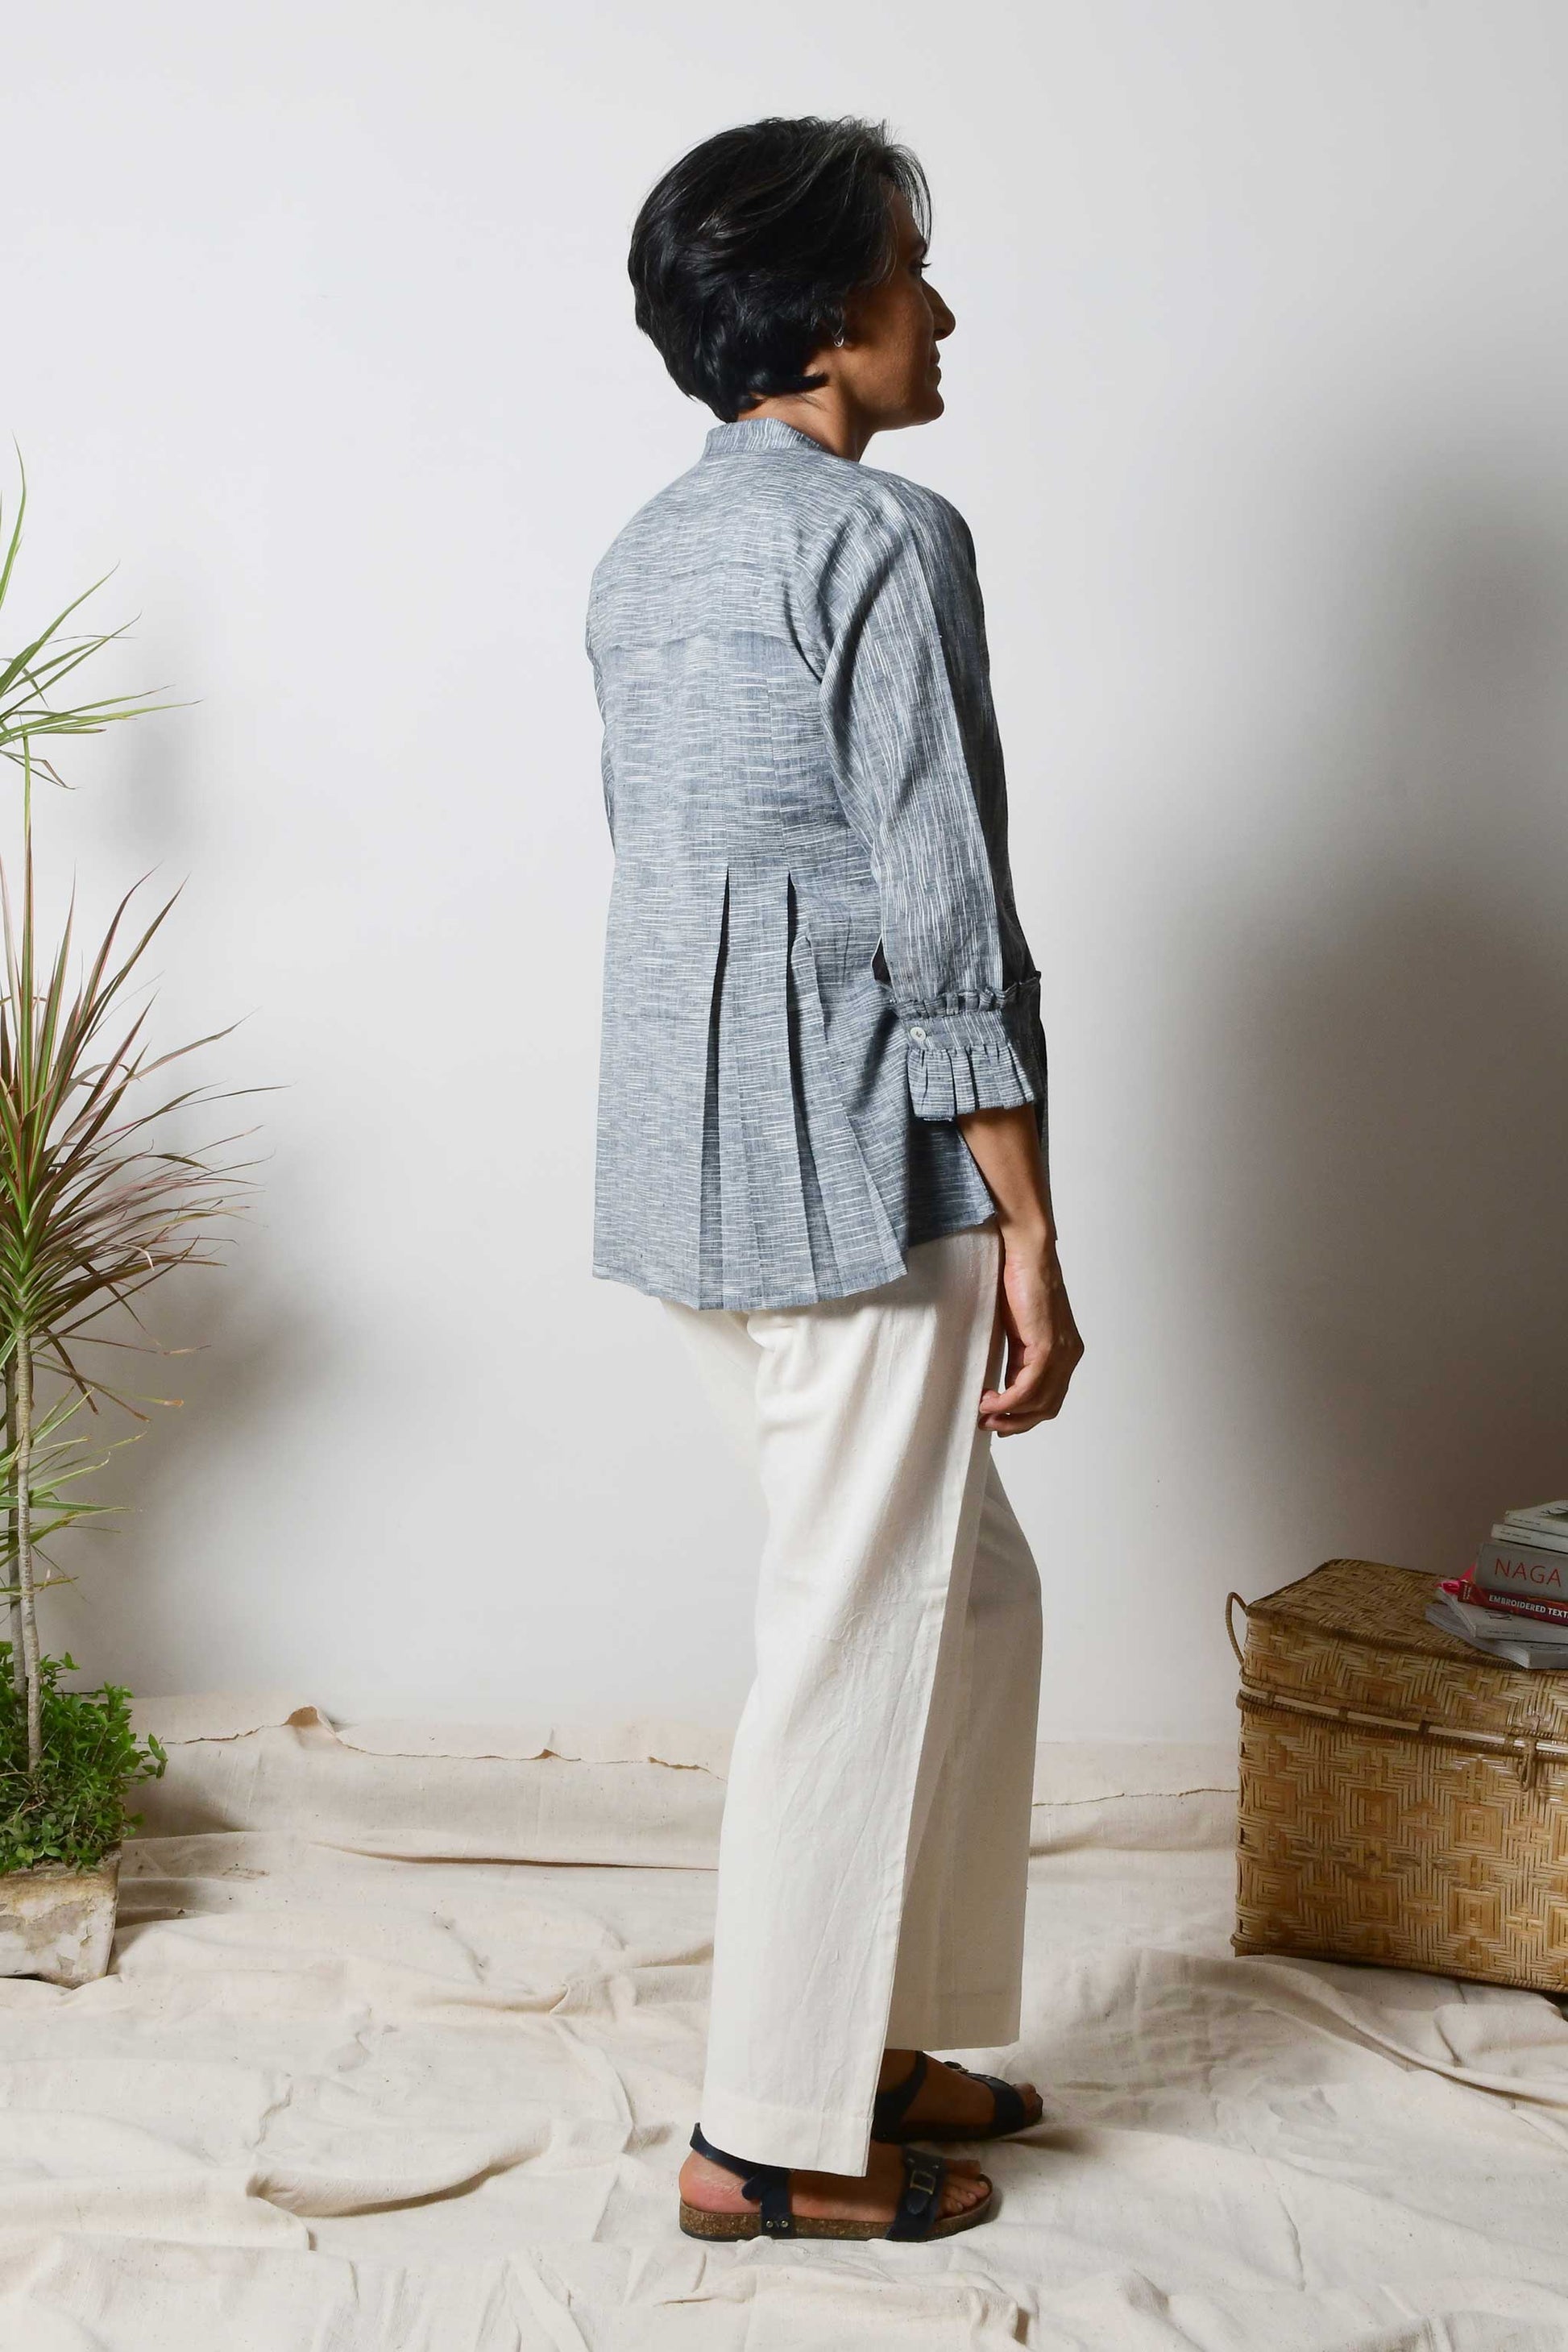 back pose of a Smiling woman with beautiful short grey hair wearing offwhite cotton pants and black cotton shirt blouse with texture on the fabric and box pleats on the top.